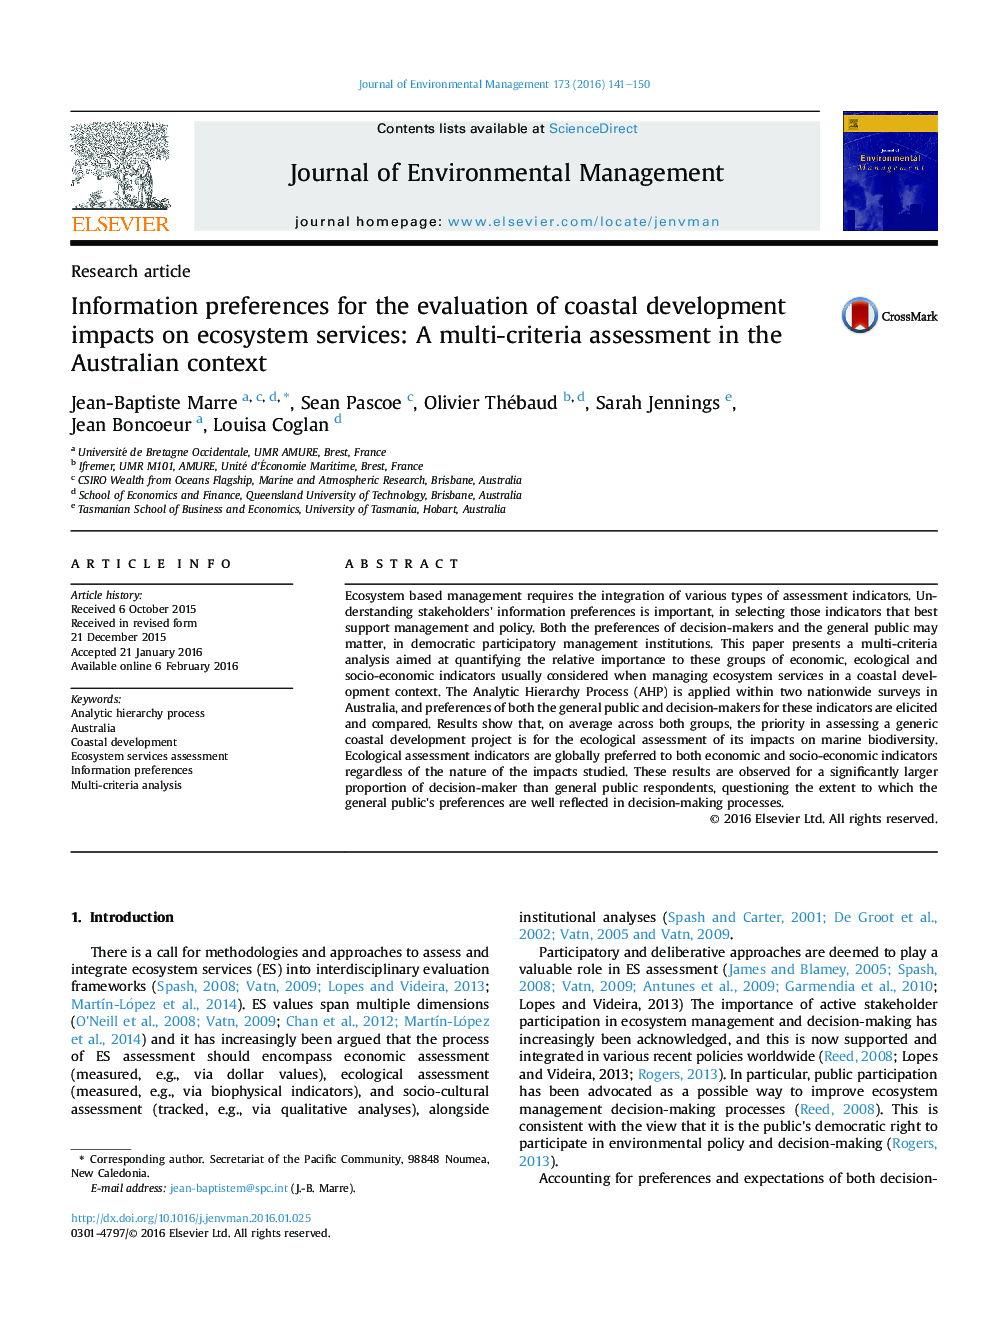 Information preferences for the evaluation of coastal development impacts on ecosystem services: A multi-criteria assessment in the Australian context